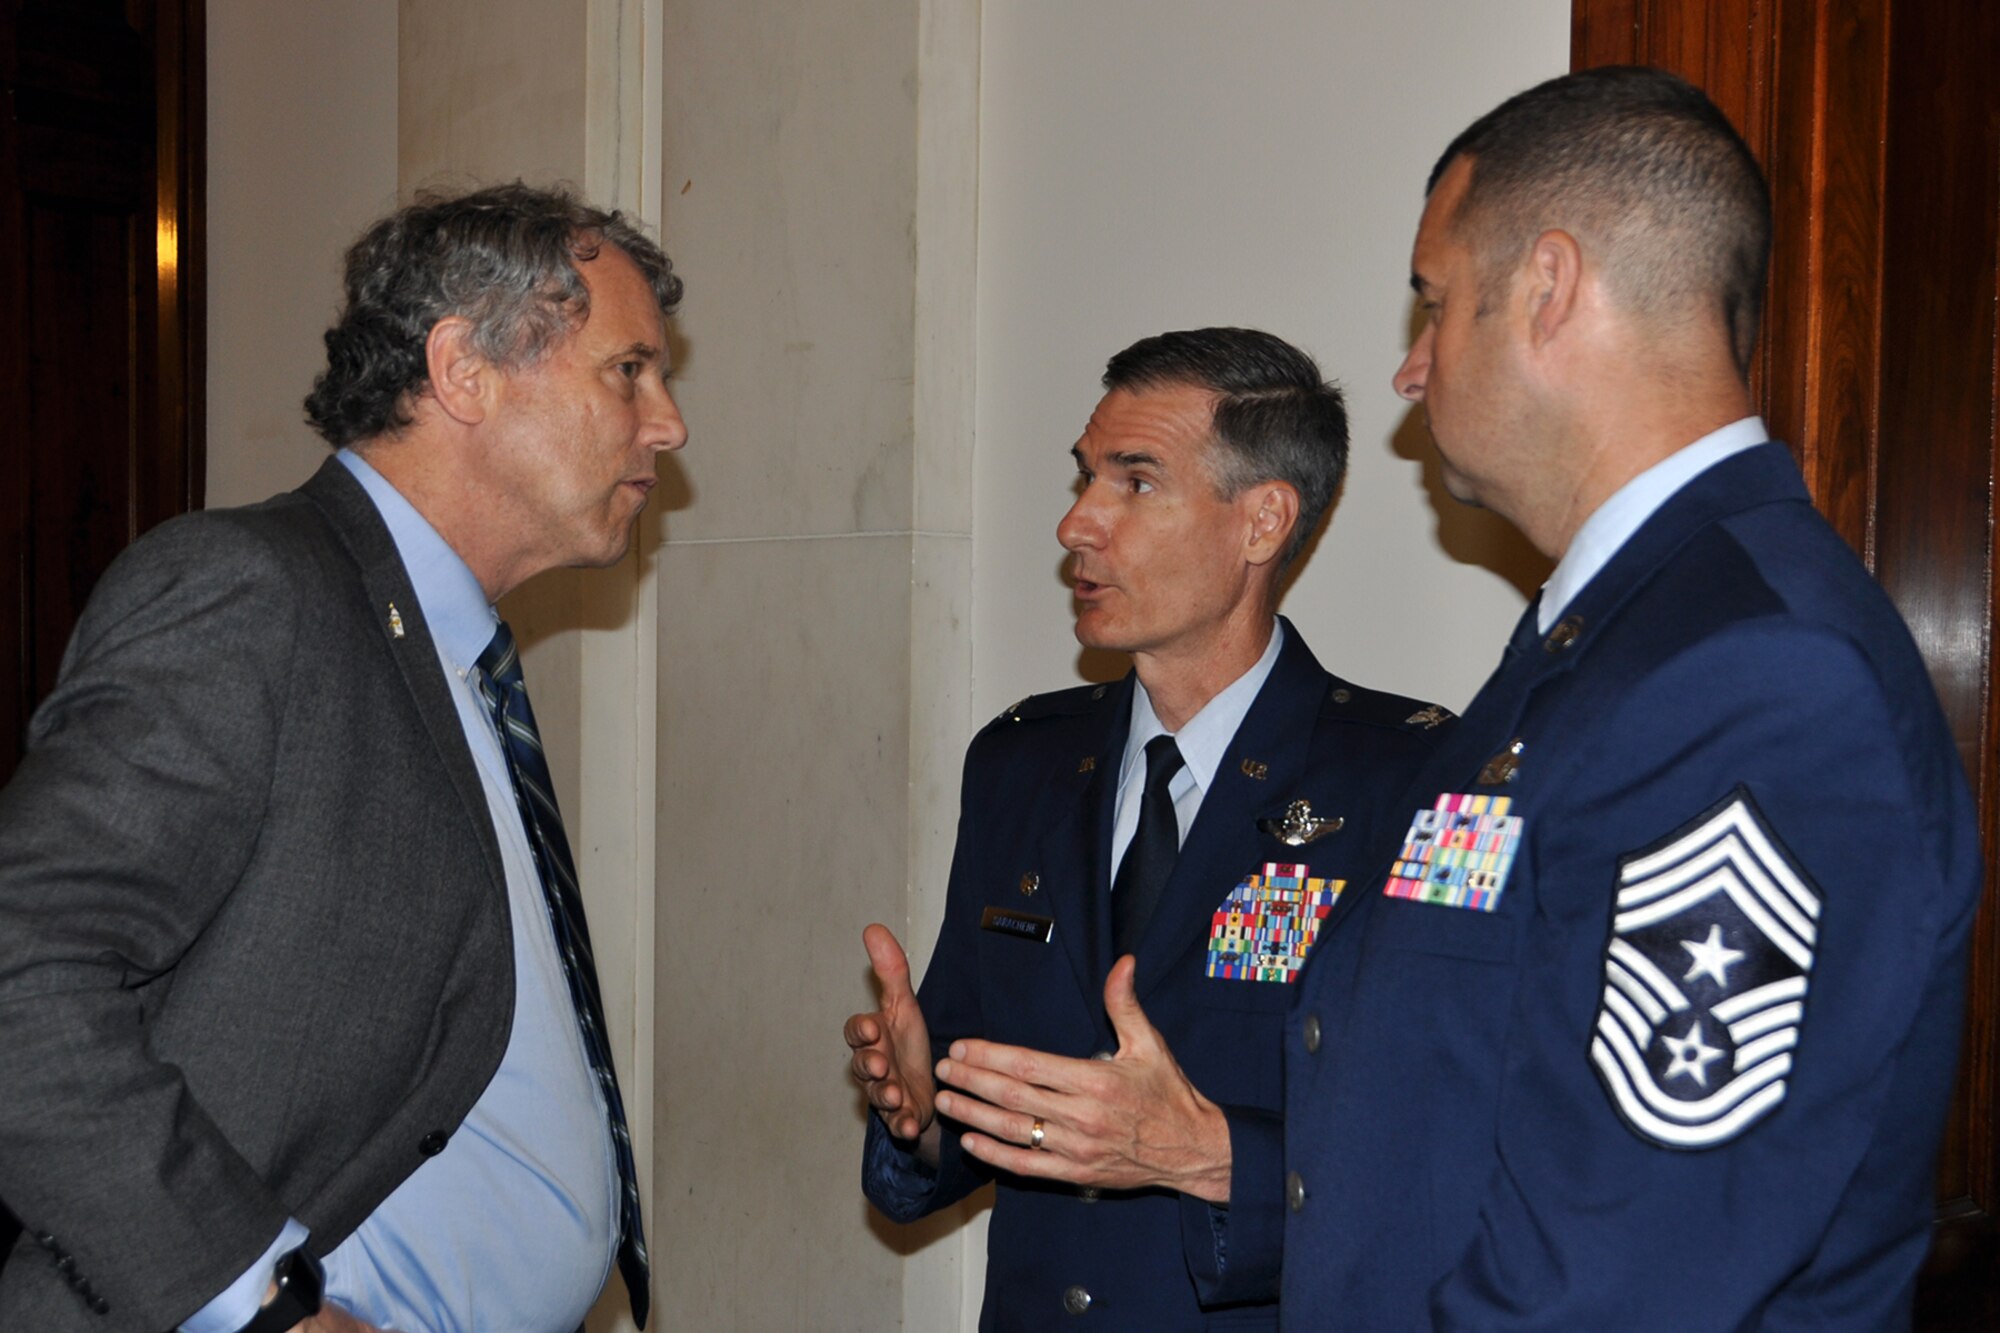 Air Force Reserve 910th Airlift Wing Commander Col. Dan Sarachene (center), based at Youngstown Air Reserve Station, Ohio, talks with Ohio Senator Sherrod Brown, as 910th Airlift Wing Command Chief Master Sgt. Bob Potts listens, during a meeting on Capitol Hill here, June 21, 2018.